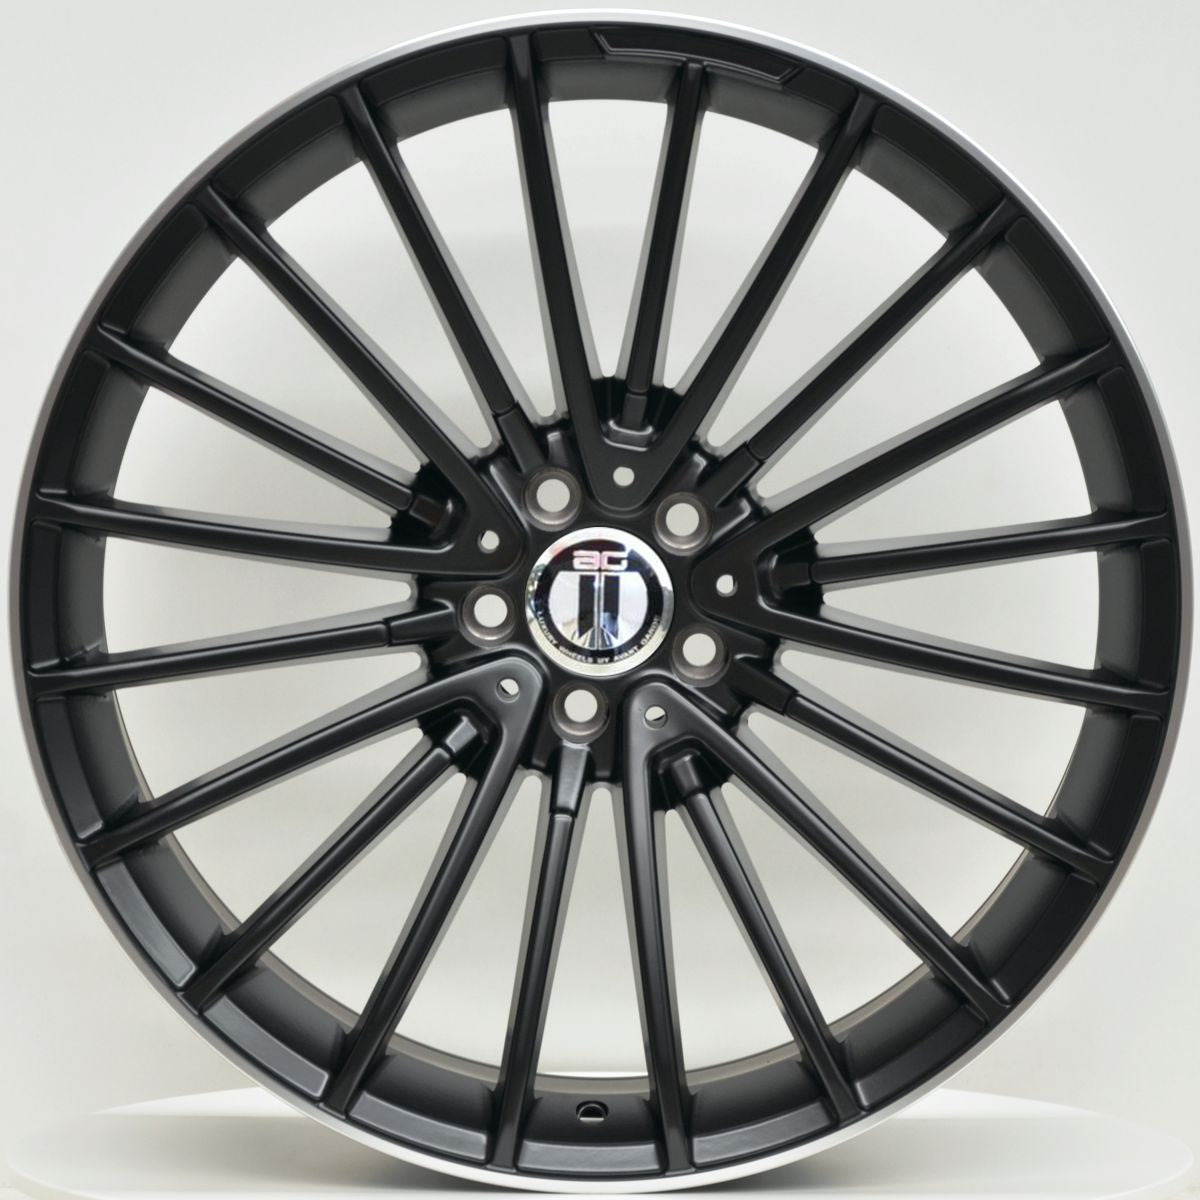 Load image into Gallery viewer, AM600 19 Inch Staggered ET45 Black Machined Lip
